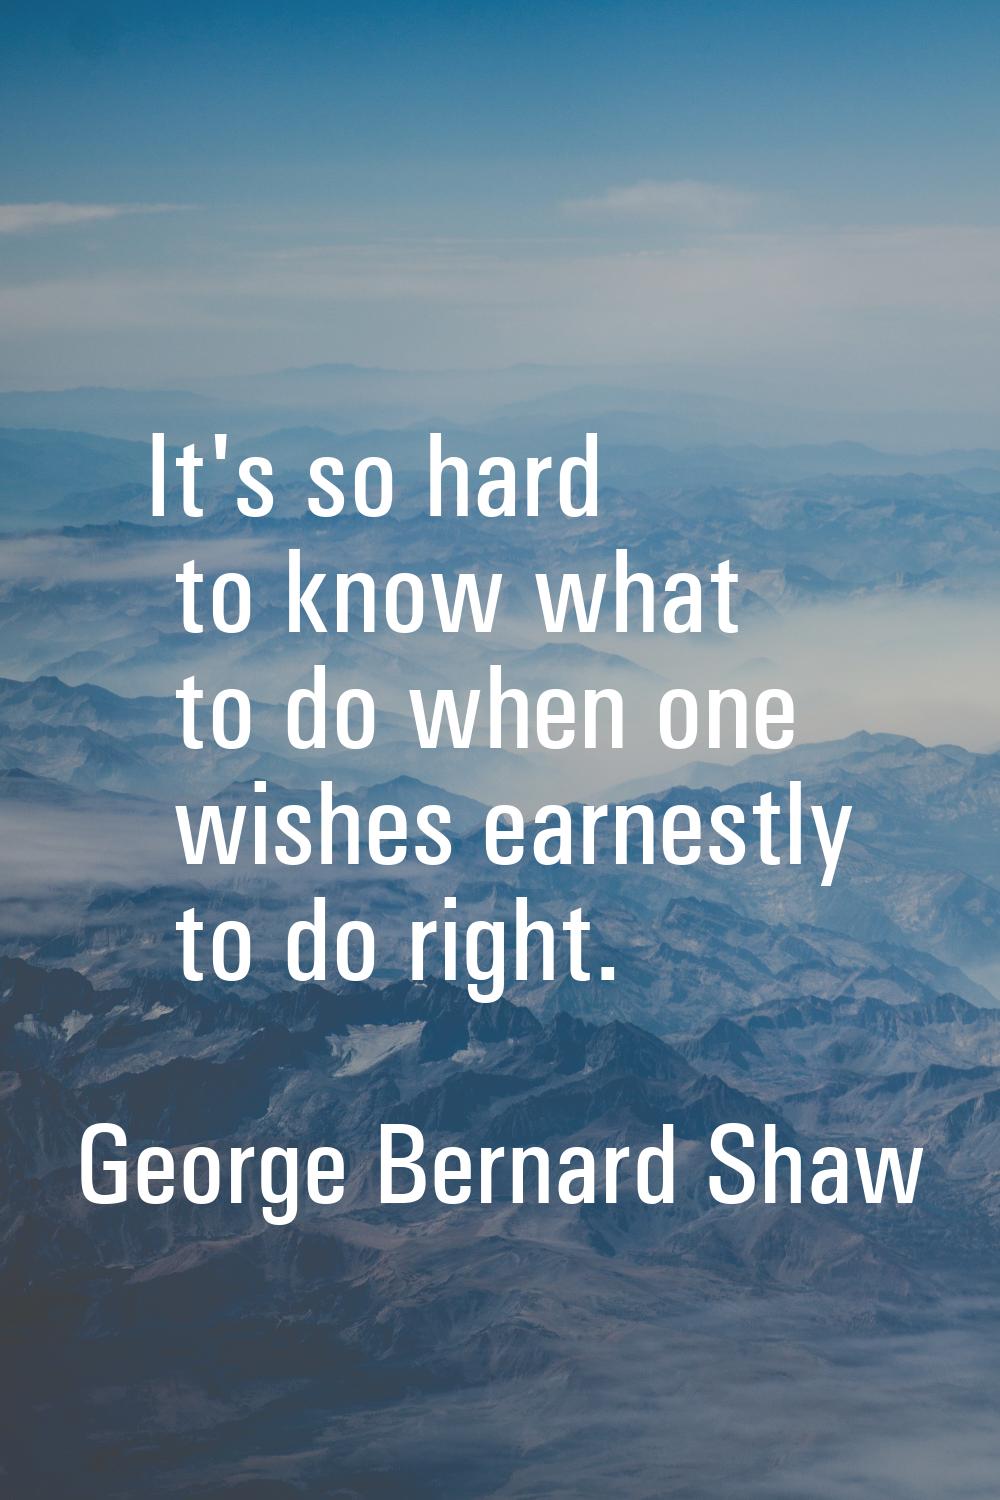 It's so hard to know what to do when one wishes earnestly to do right.